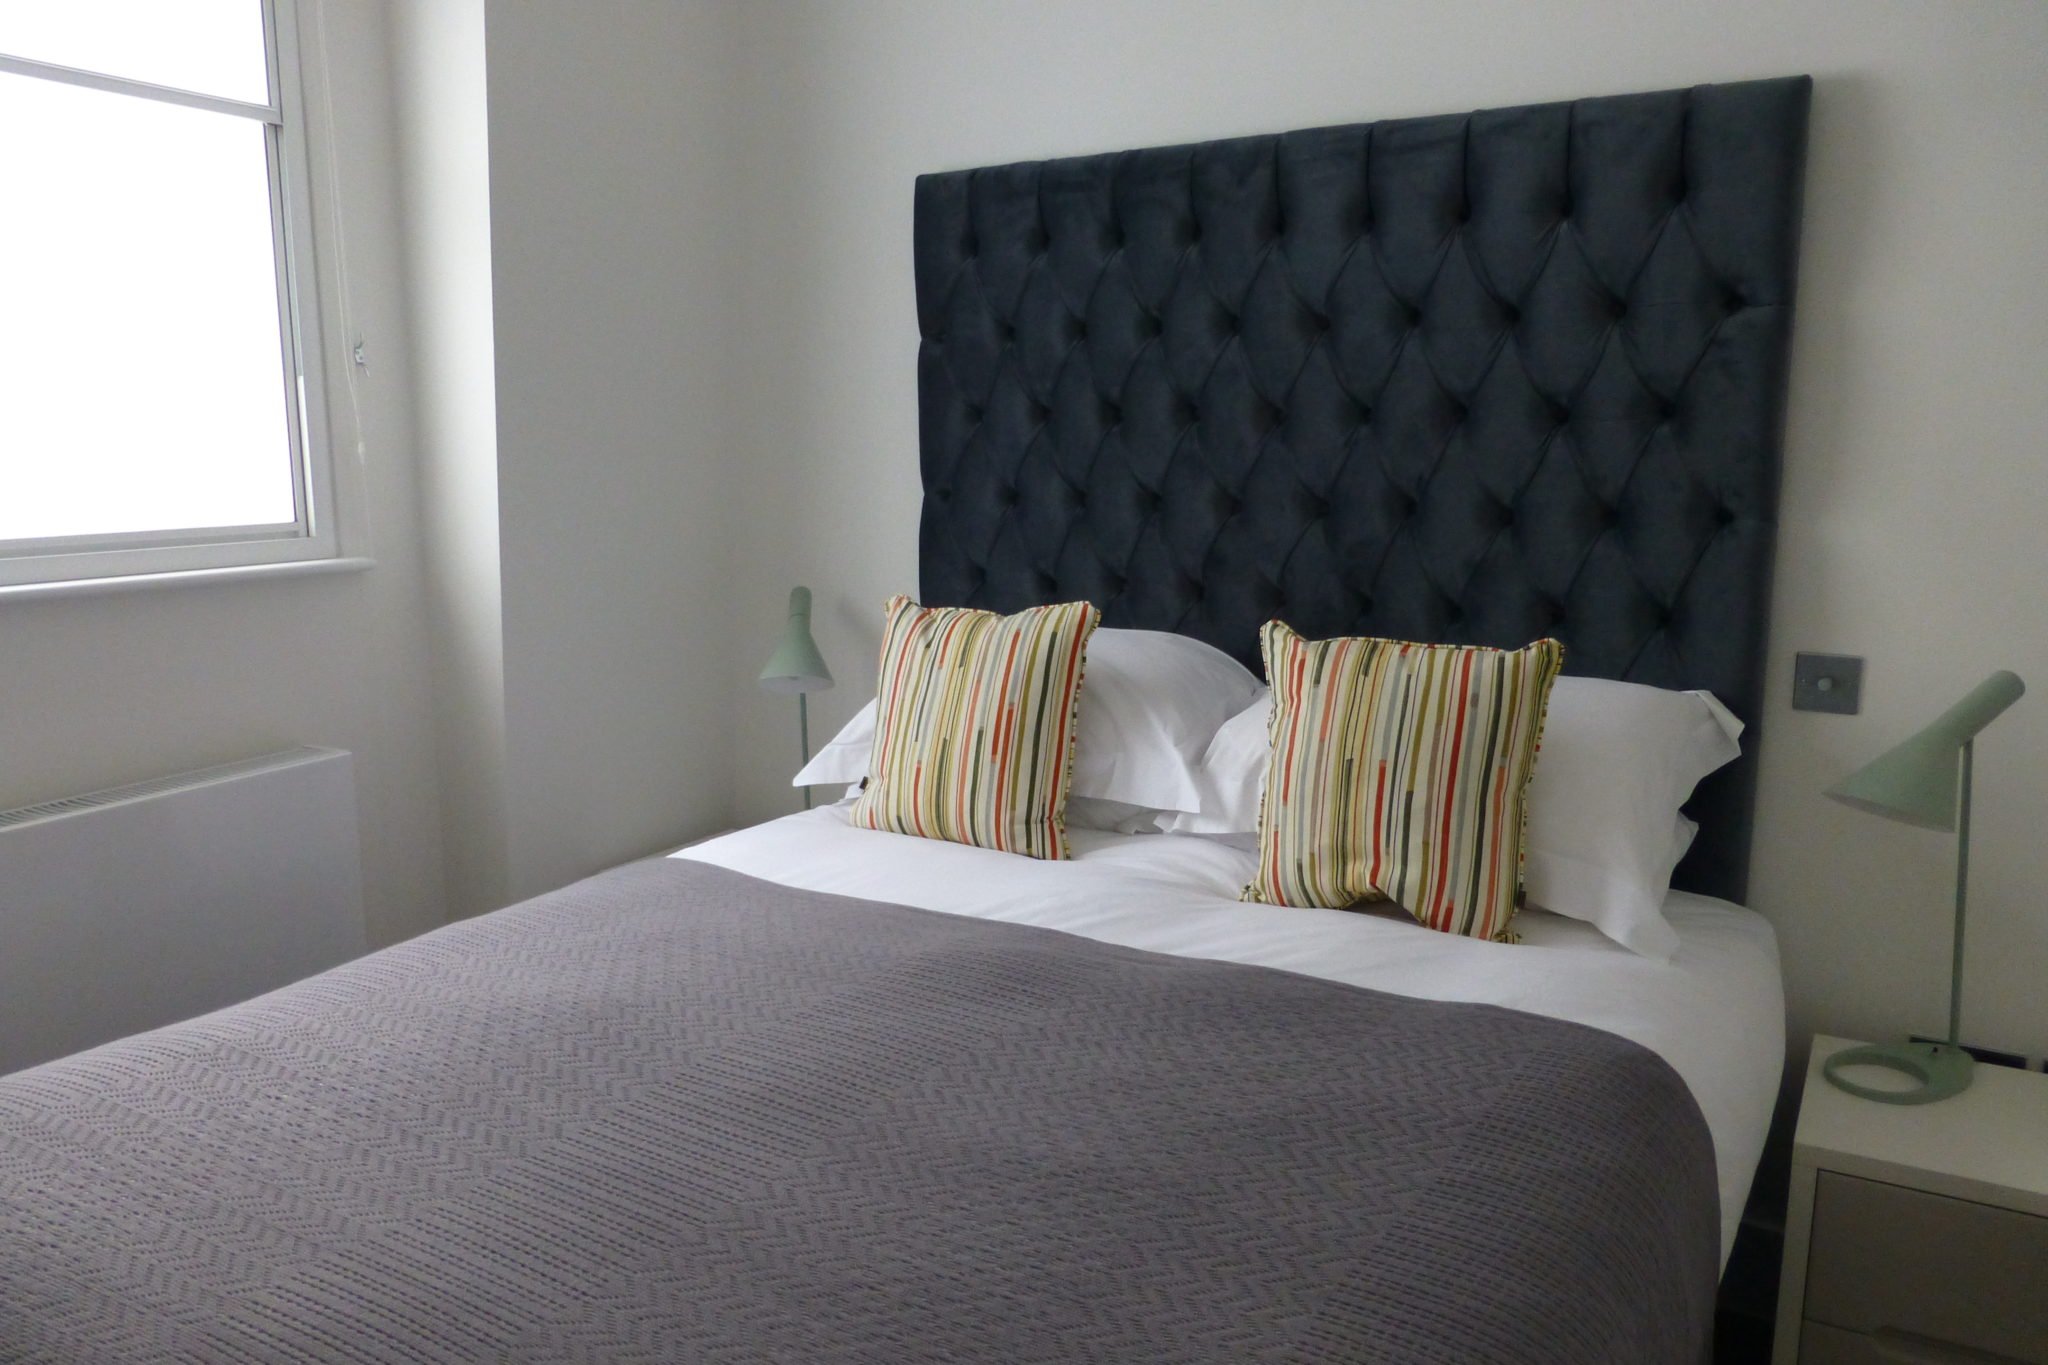 Shaftesbury-Avenue-Serviced-Apartments-London-| Short-Let-Accommodation-Soho,-West-End,-Piccadilly-Circus,-Oxford-Street-|-AVAILABLE-NOW--BOOK-NOW---Urban-Stay